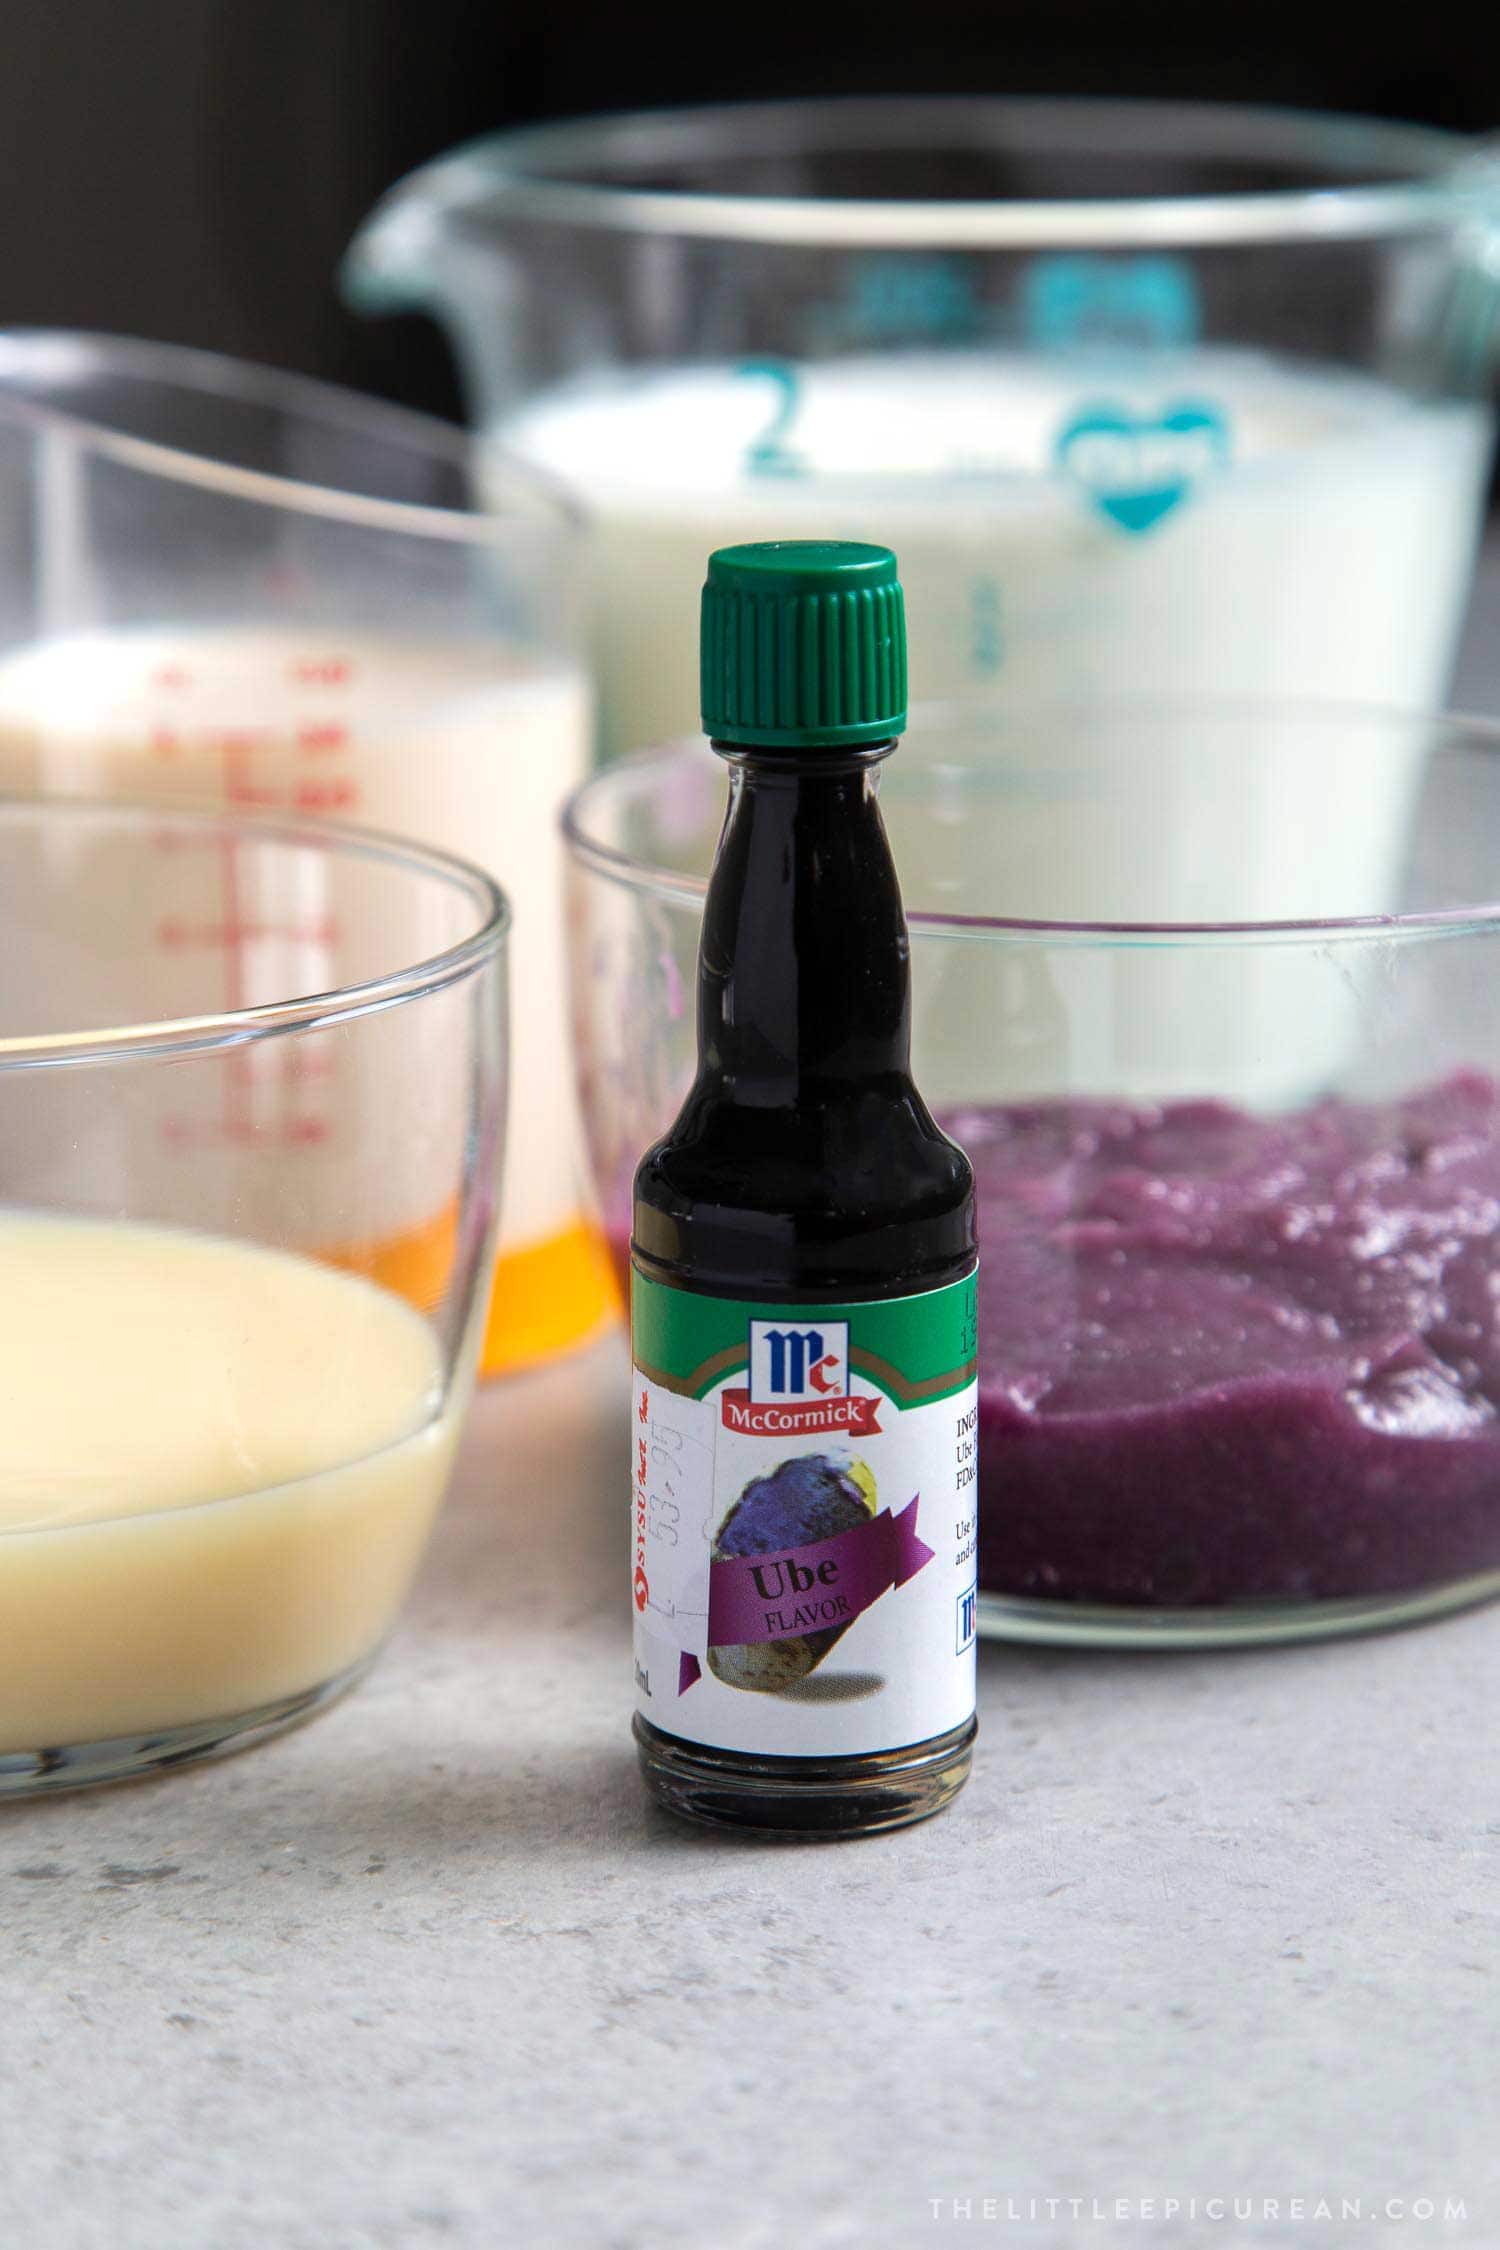 Ube Extract adds extra flavor and color to all ube desserts. The extract is used in conjunction with ube halaya (purple yam jam) to intensify the flavors of this no churn ube ice cream. 